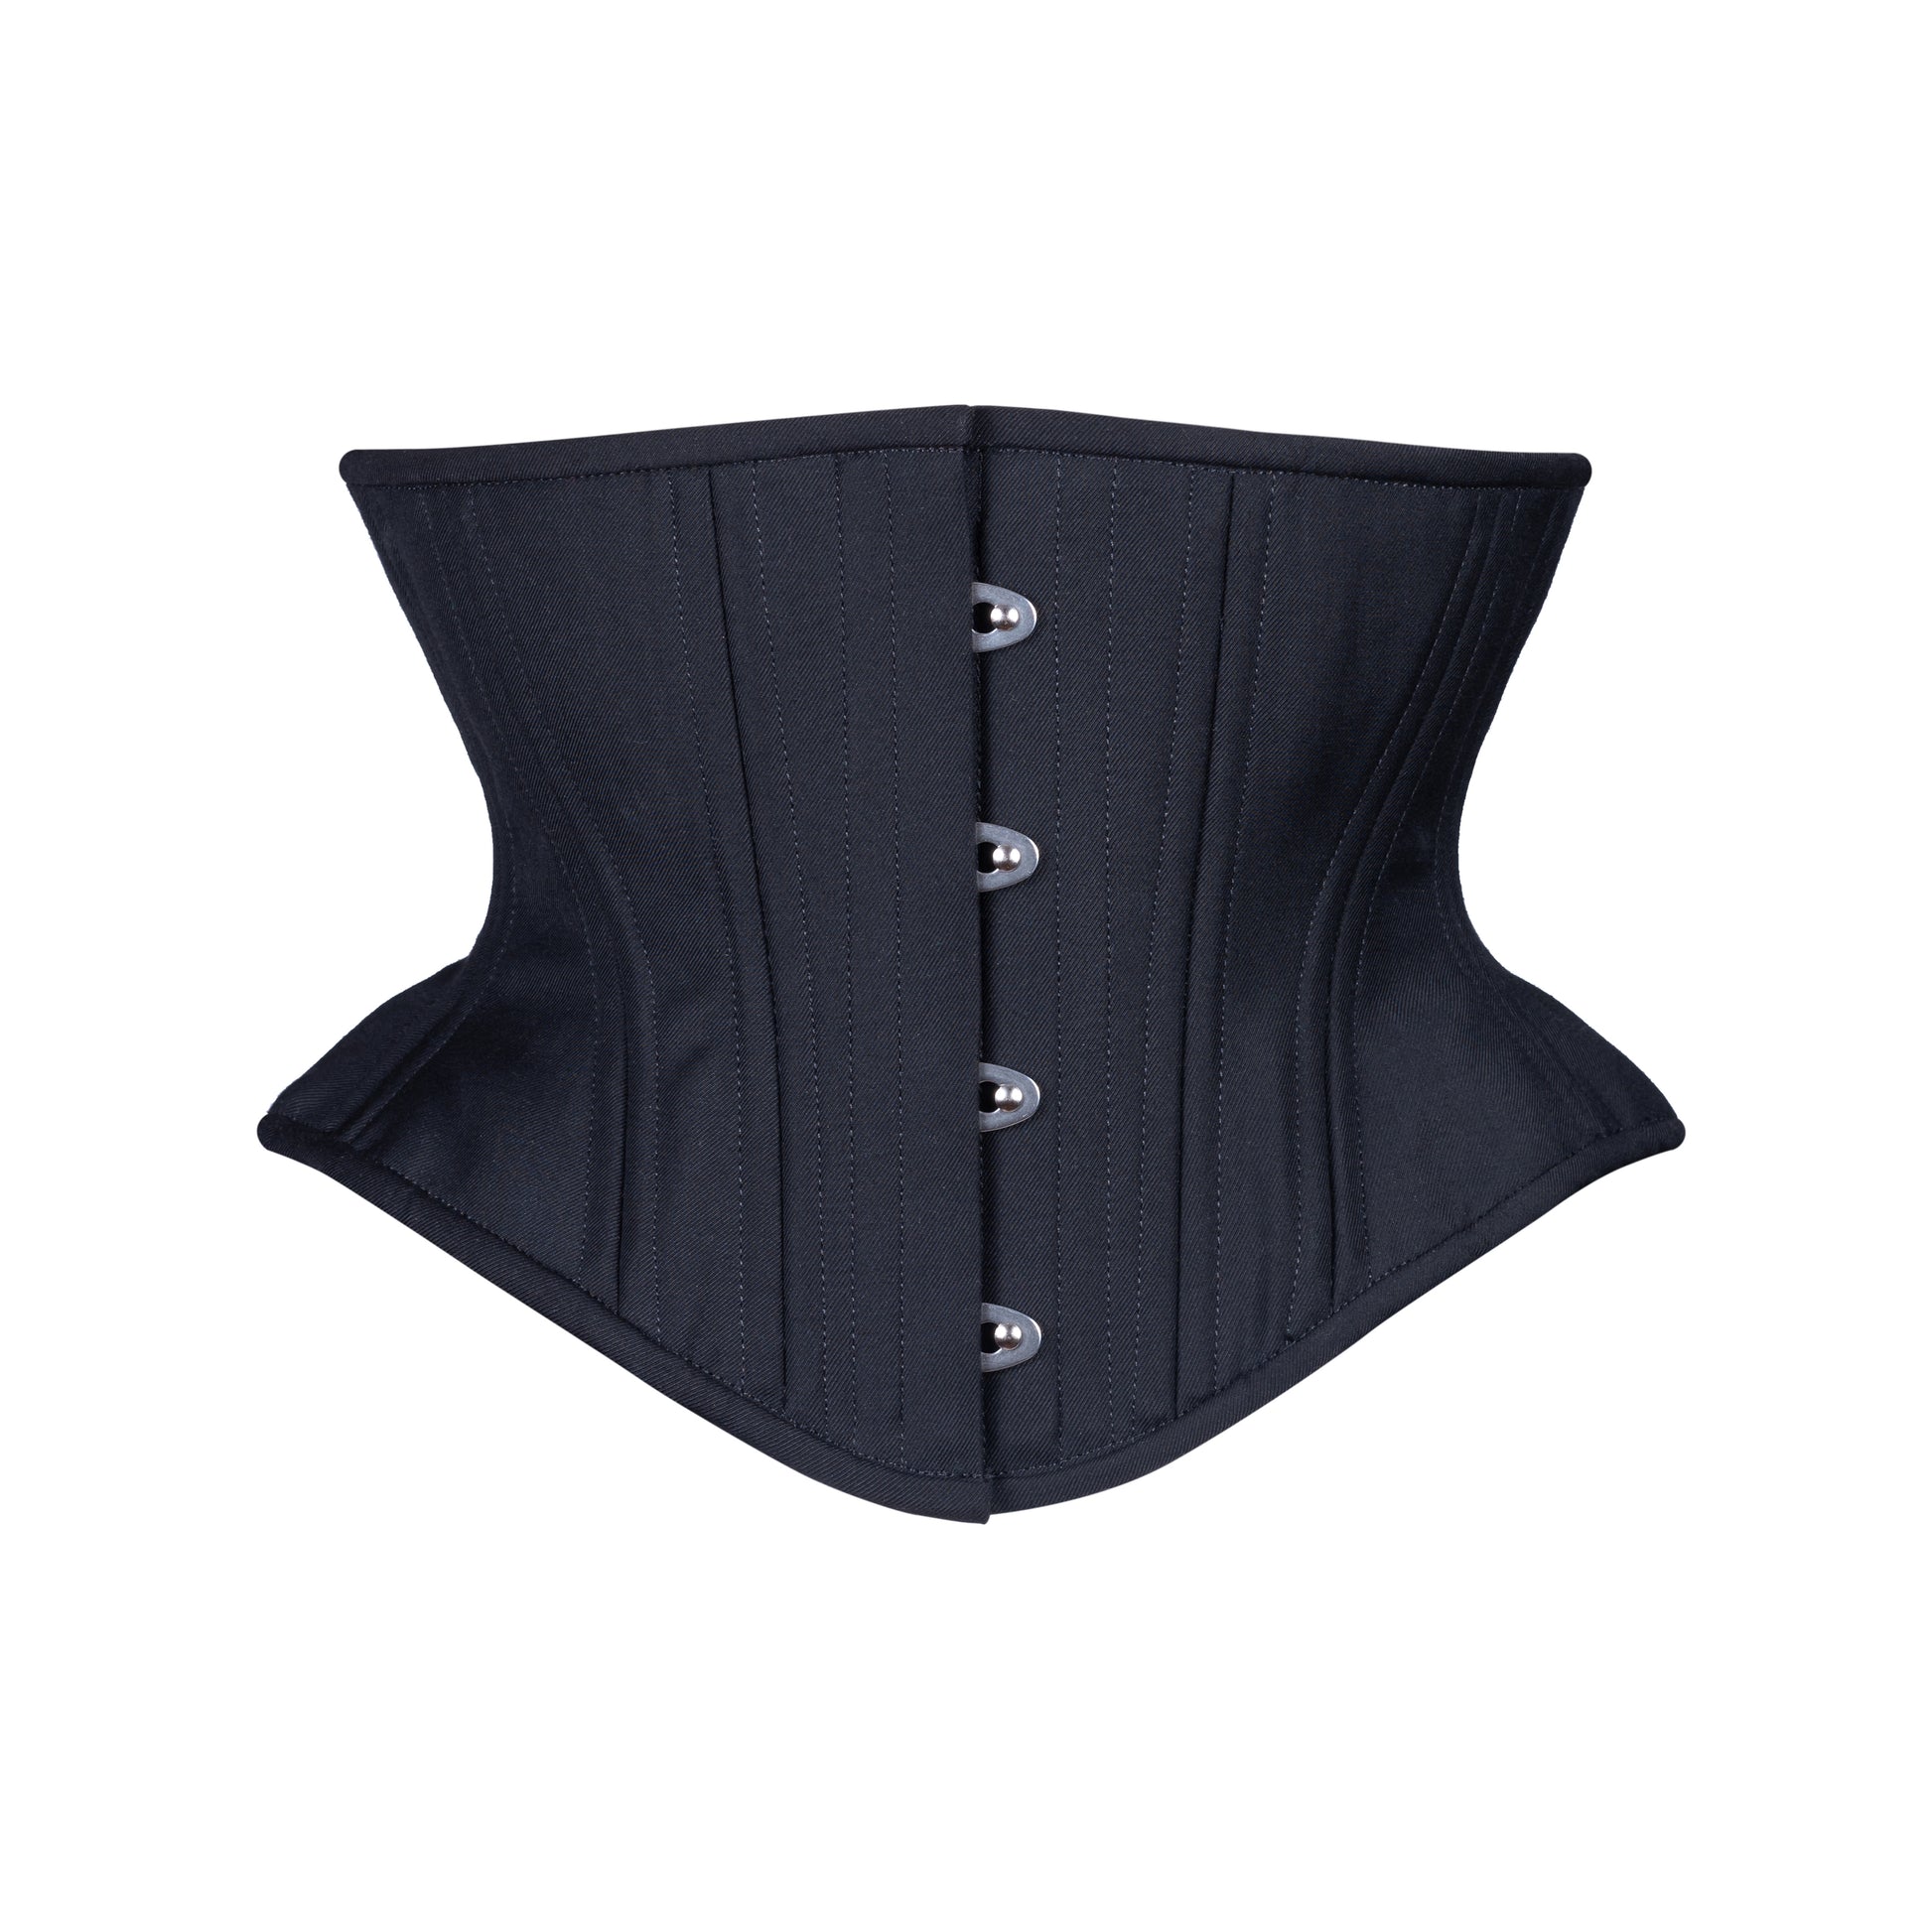 Hourglass body ⌛️ Perfect shape waist trainer was designed to